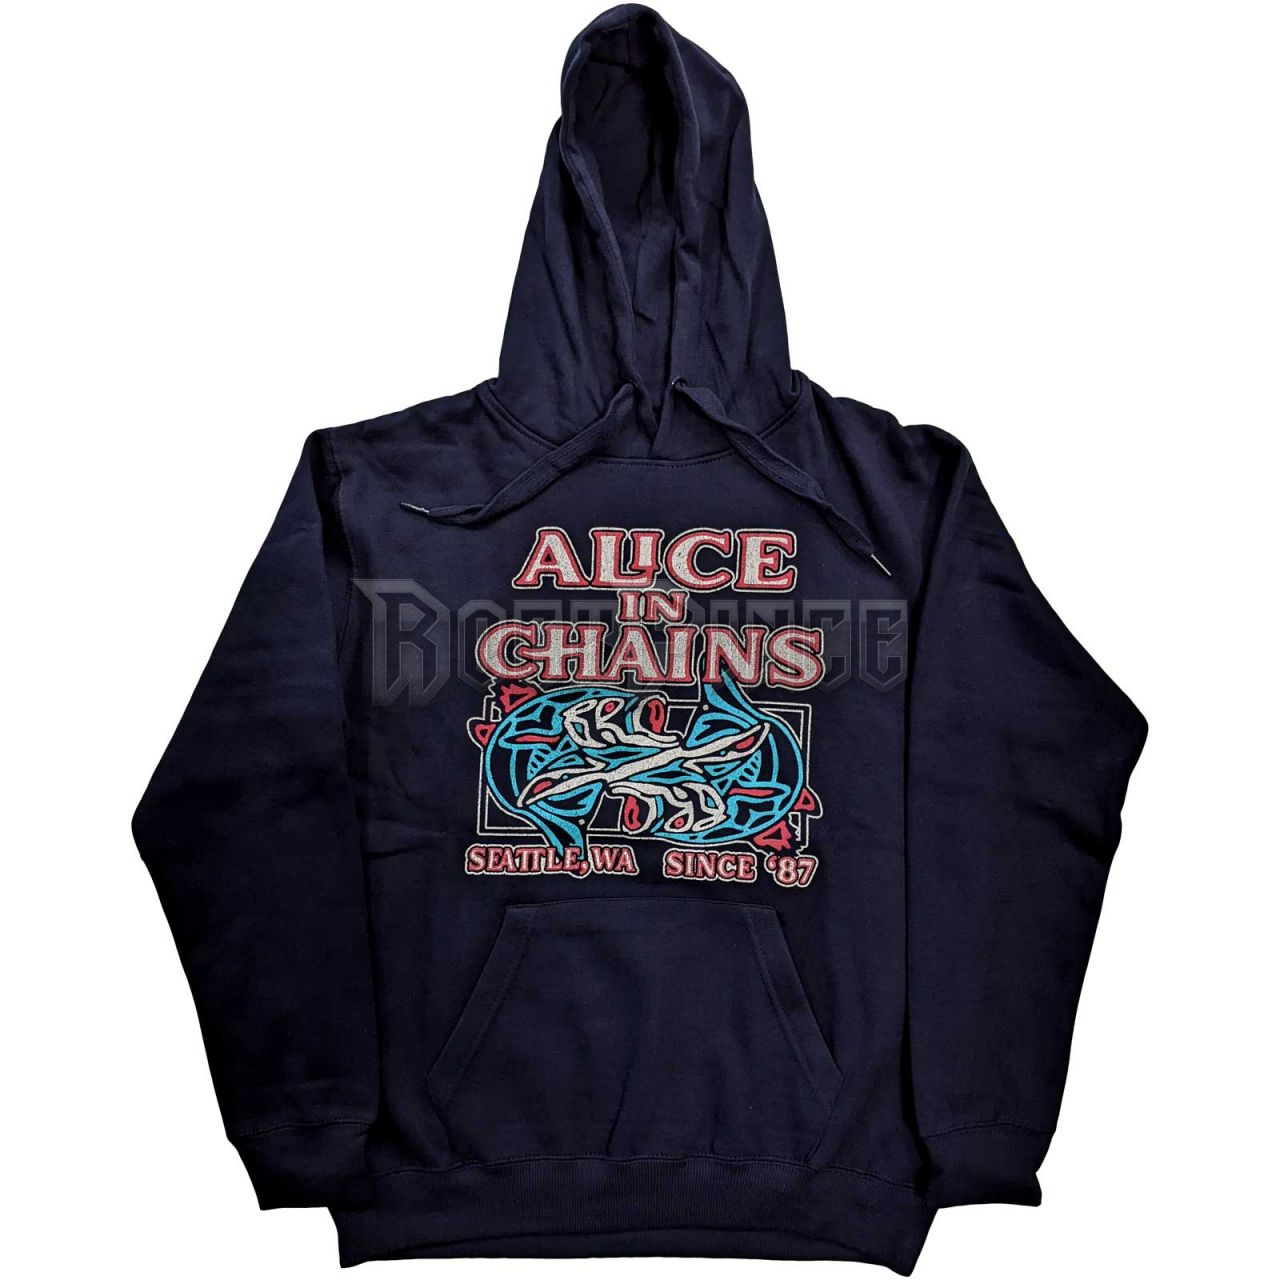 Alice In Chains - Totem Fish - unisex kapucnis pulóver - AICHD17MN